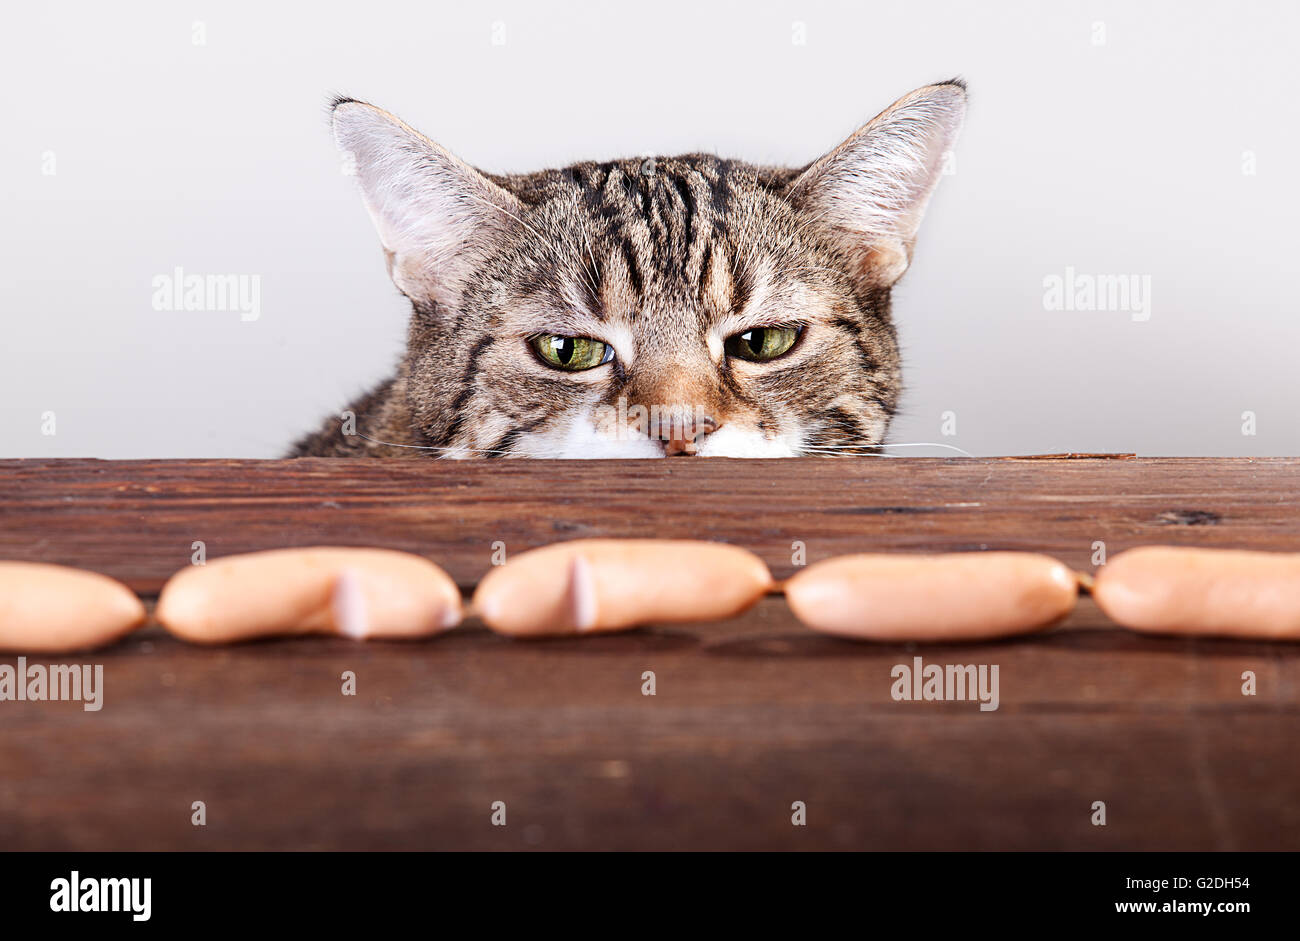 Curious Cat being tempted by sausages on table Stock Photo